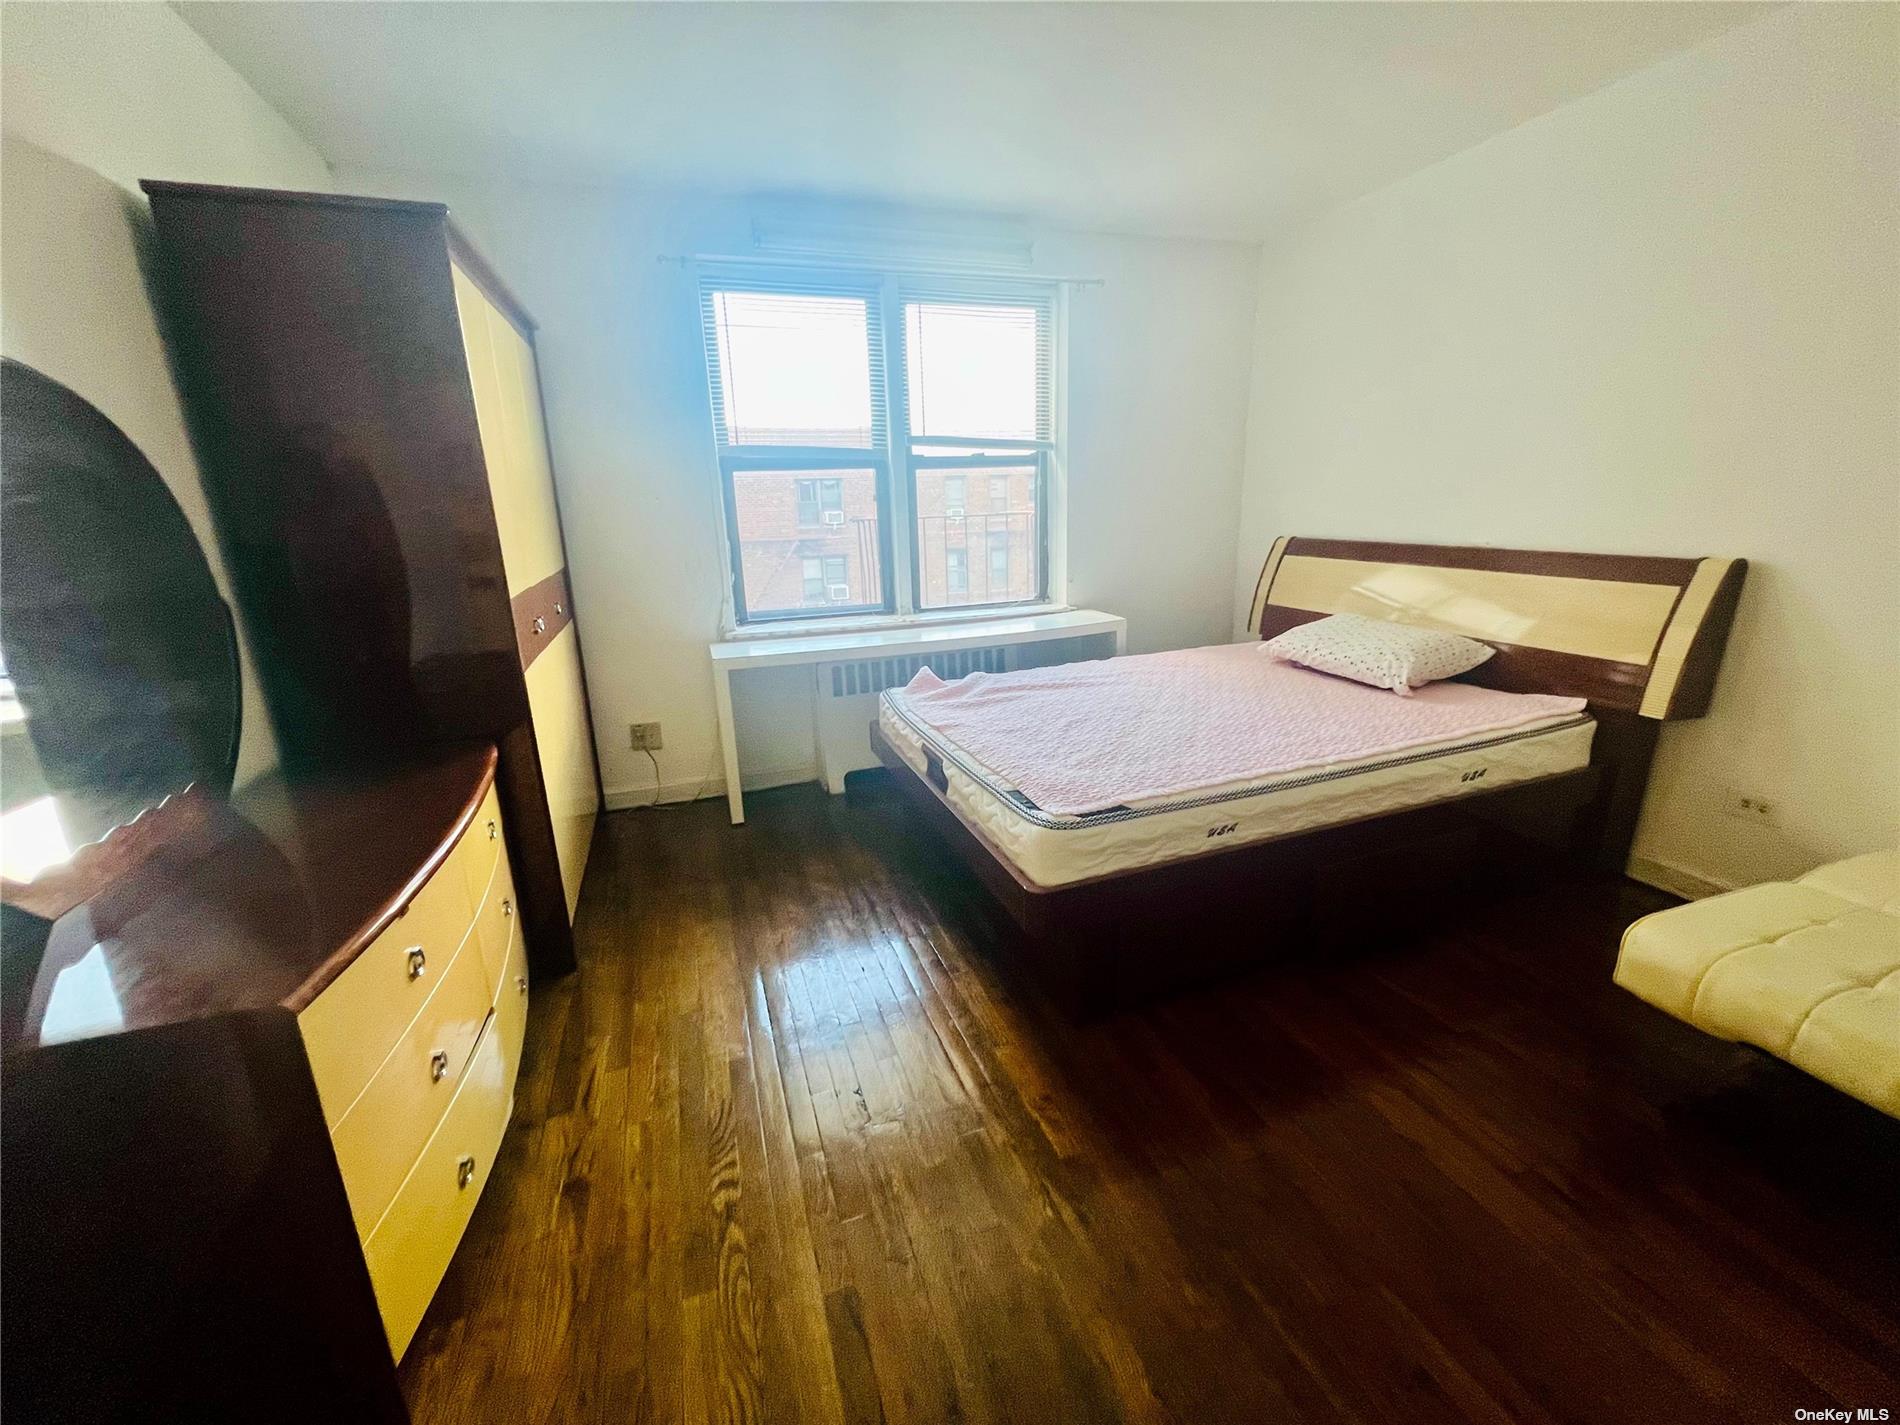 a spacious bedroom with a bed and wooden floor